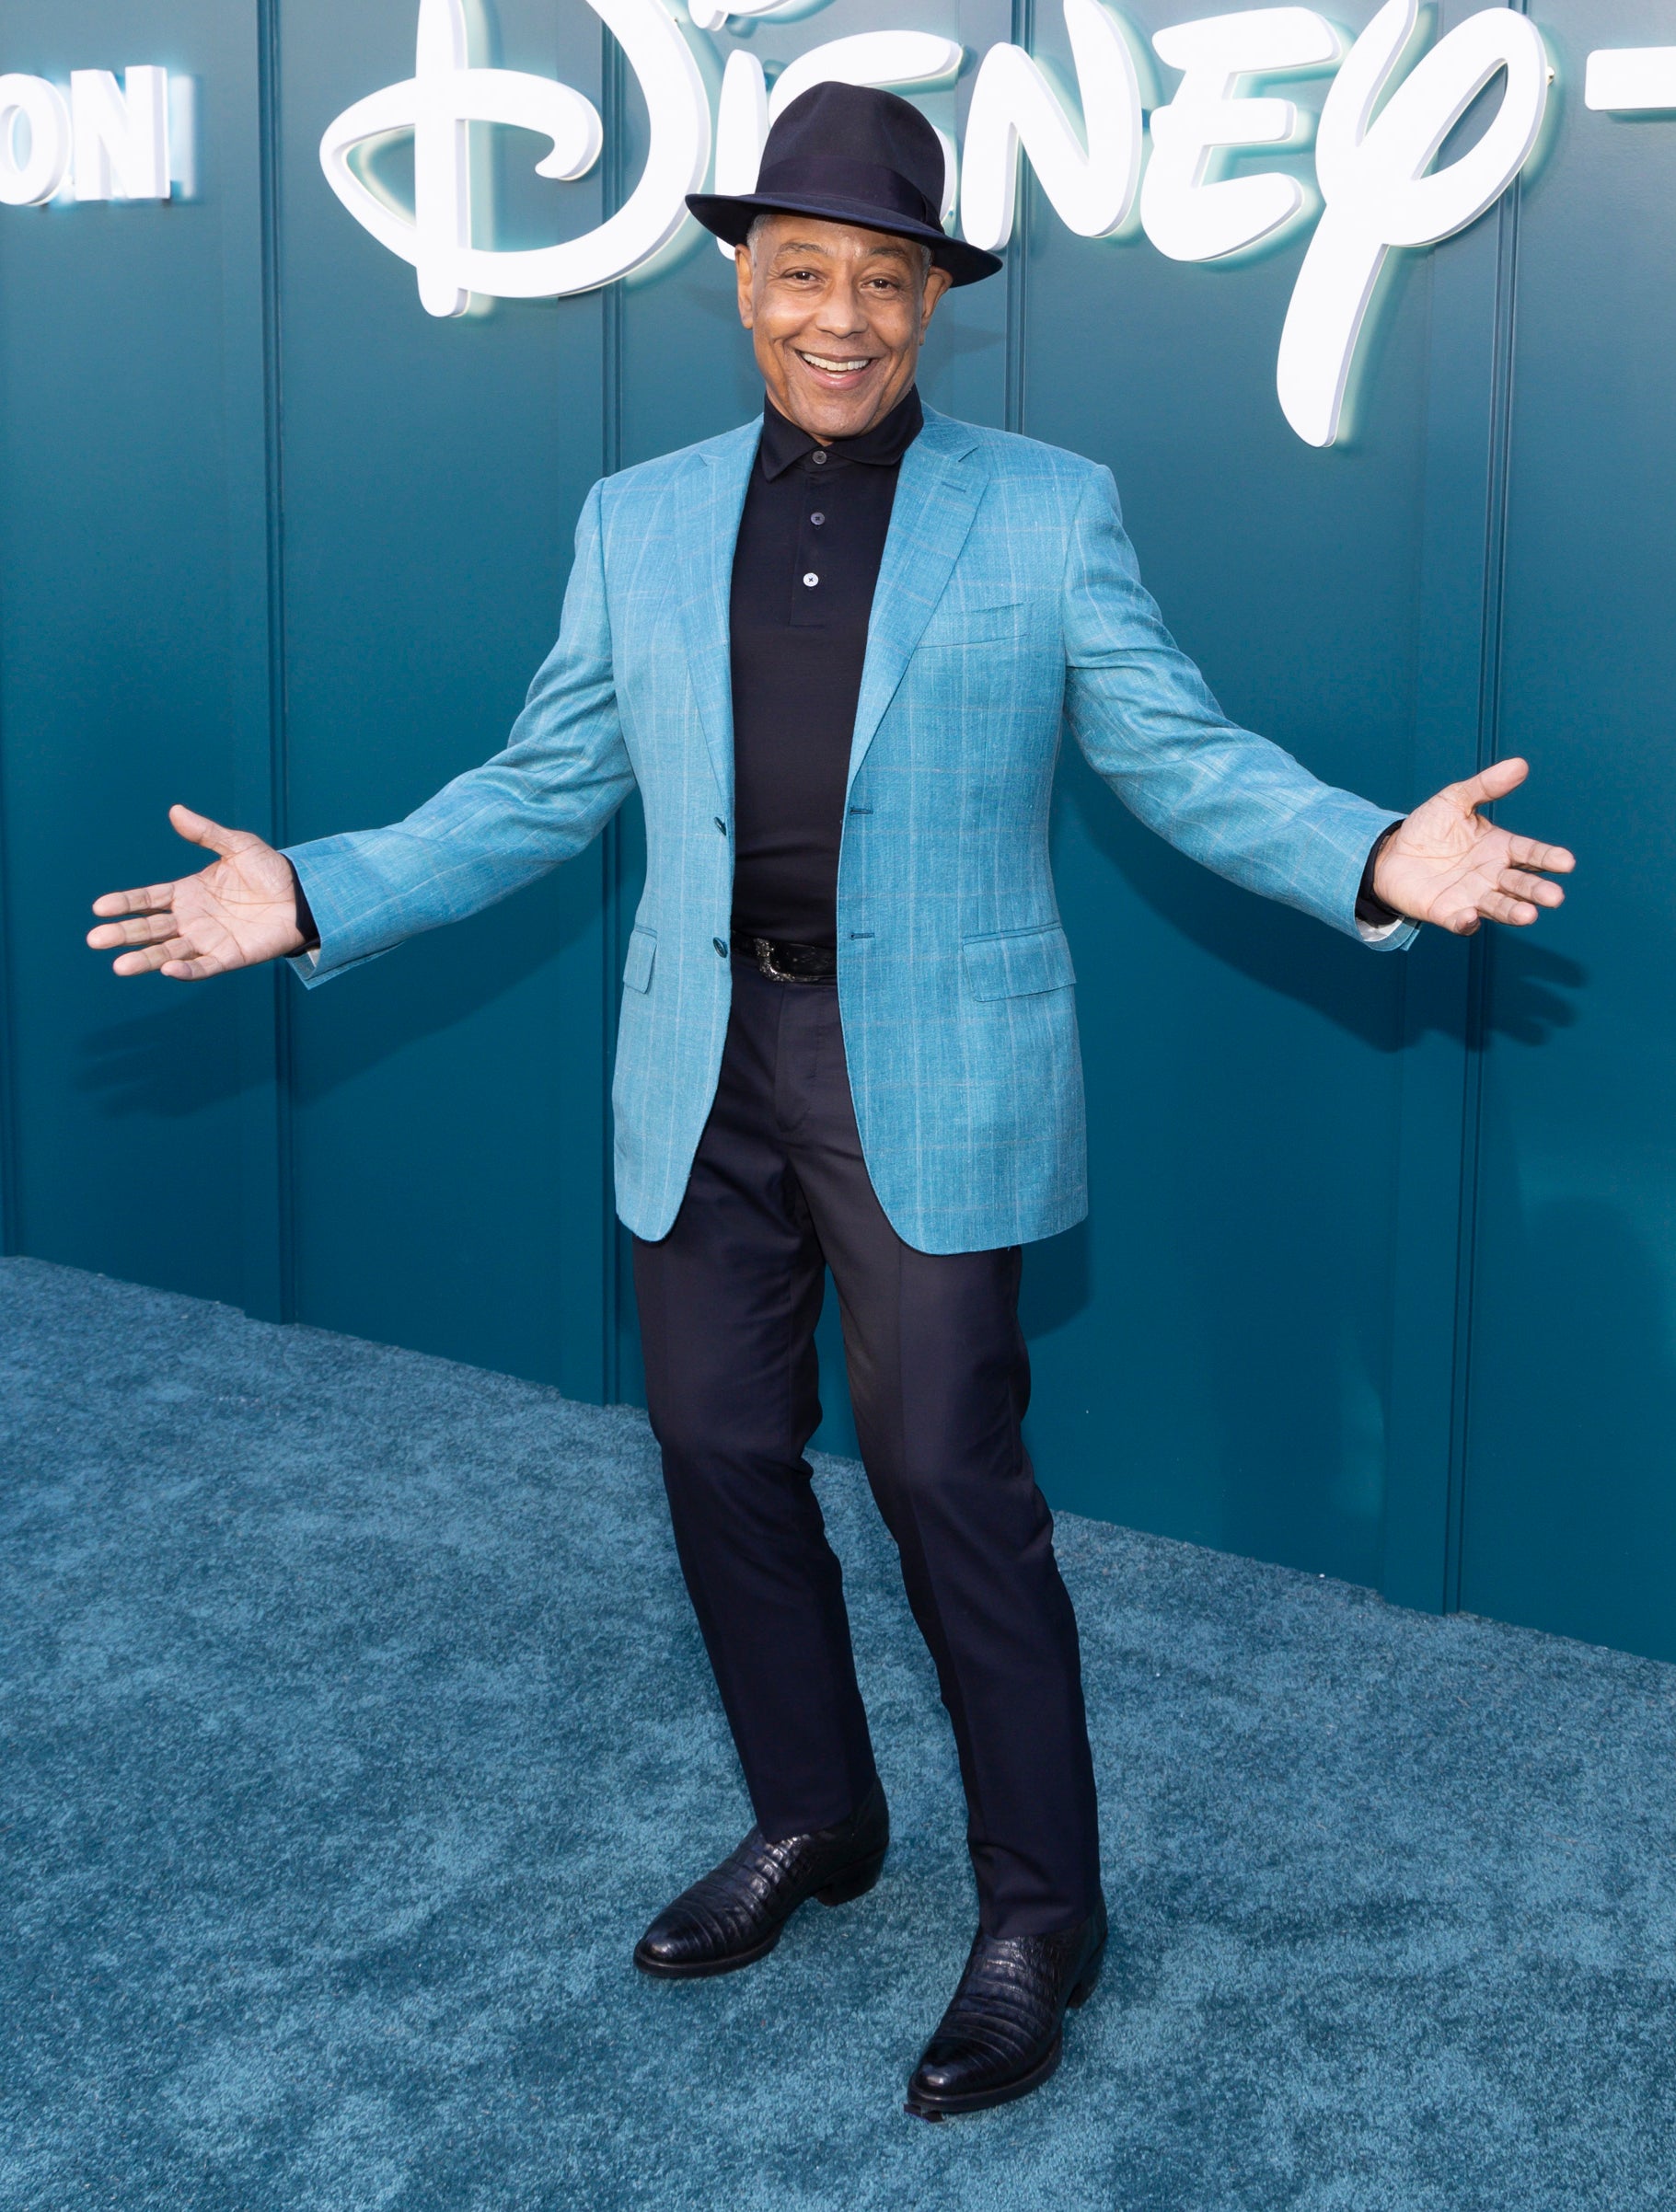 Giancarlo Esposito posing at a media event with his arms open